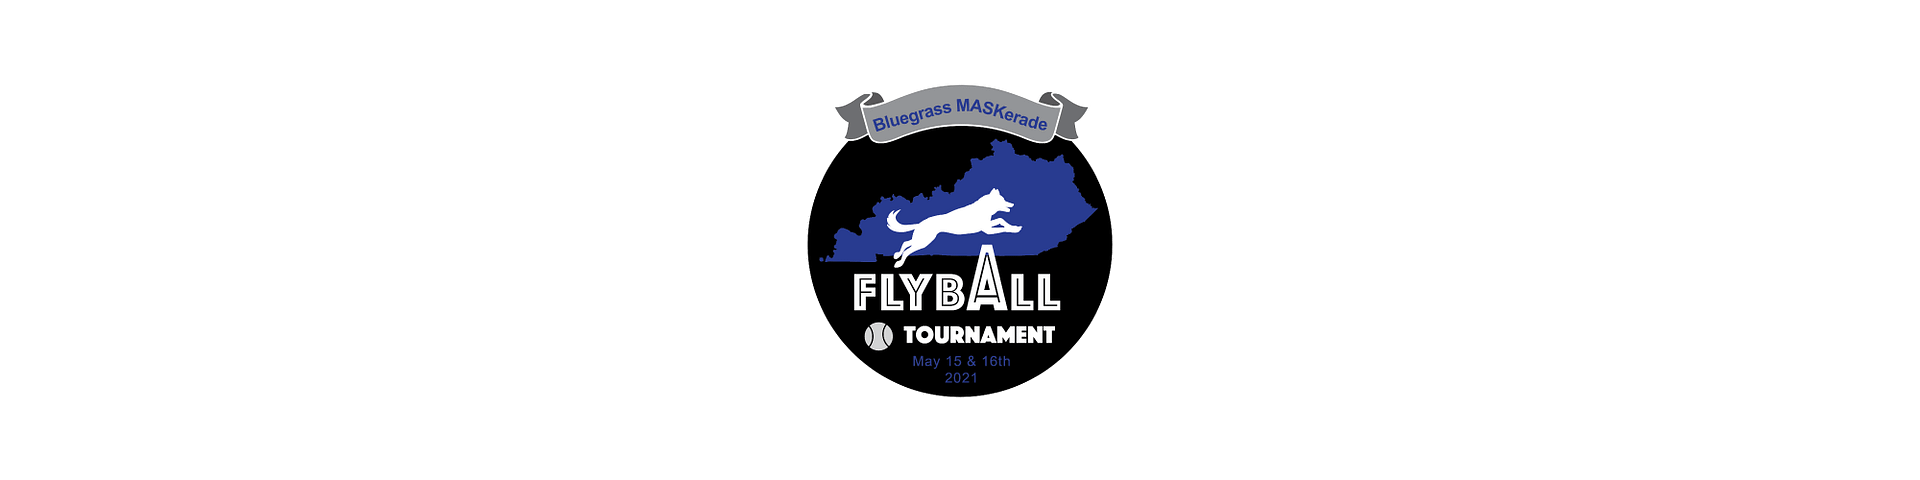 Flyball Tournament